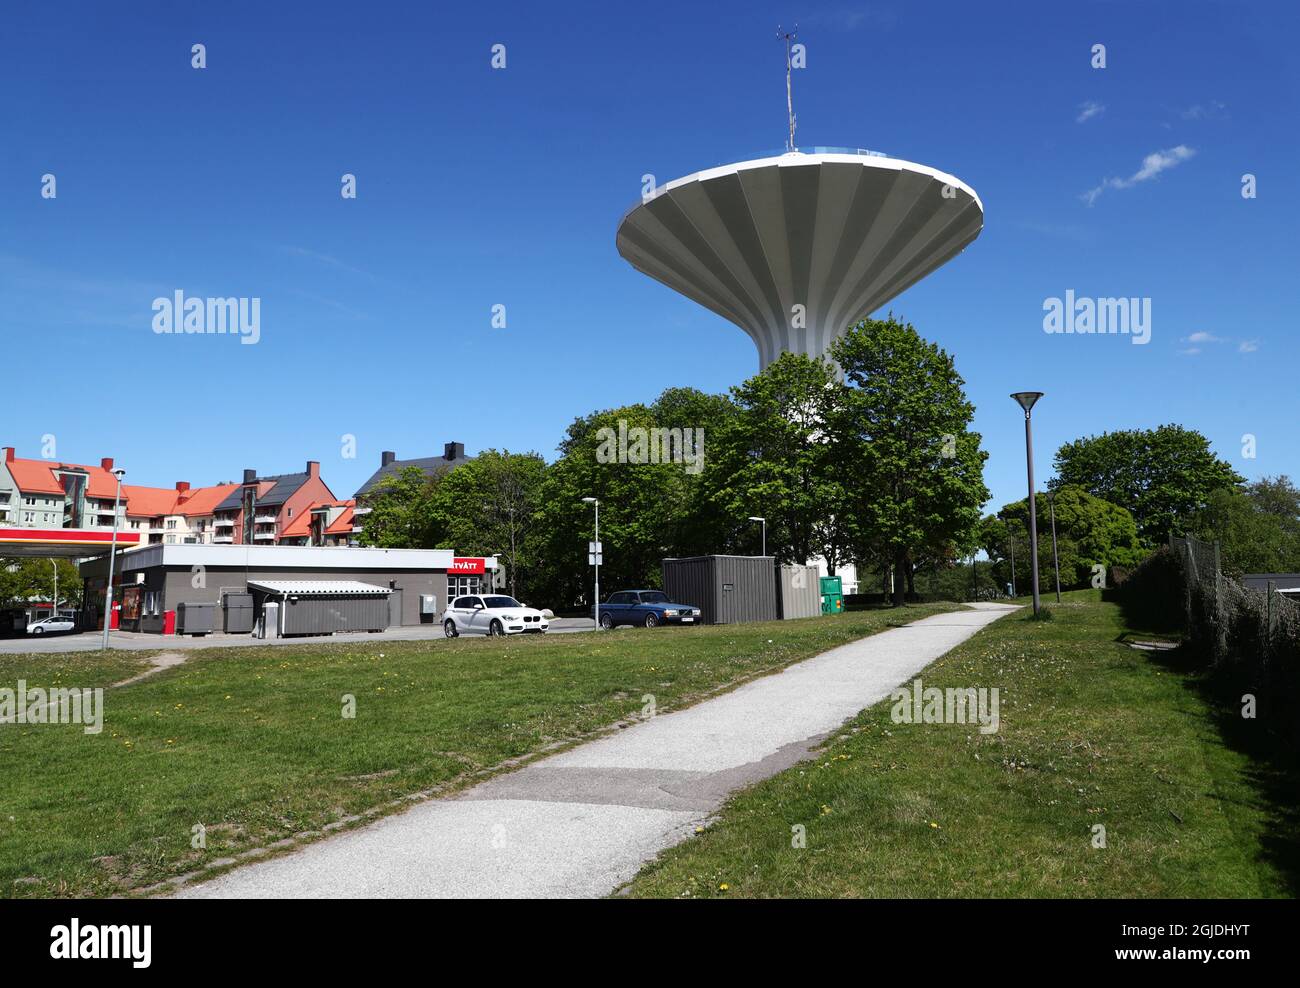 Svampen - The Mushroom - water tower in Orebro city, Sweden. It was created by architect Sune Lindstrom and is 58 meters high. Photo Jeppe Gustafsson / TT / code 71935 Stock Photo